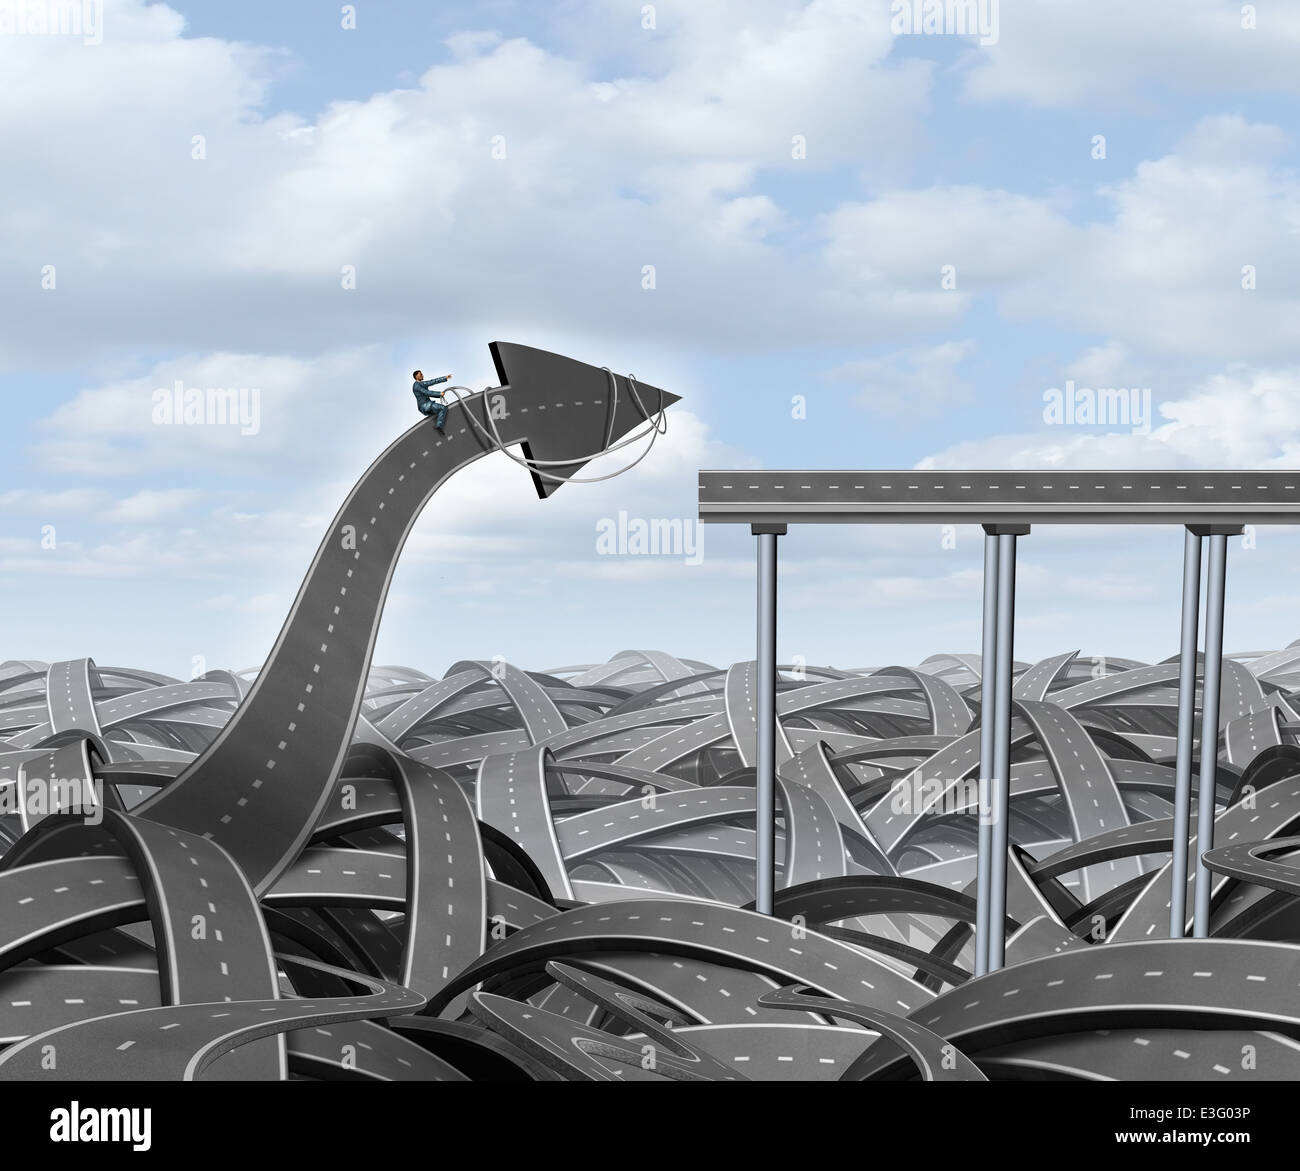 Journey success business concept as a businessman guiding a road arrow out of chaos to connect with a straight bridge as a metaphor for leadership and the determined courage of individualism. Stock Photo